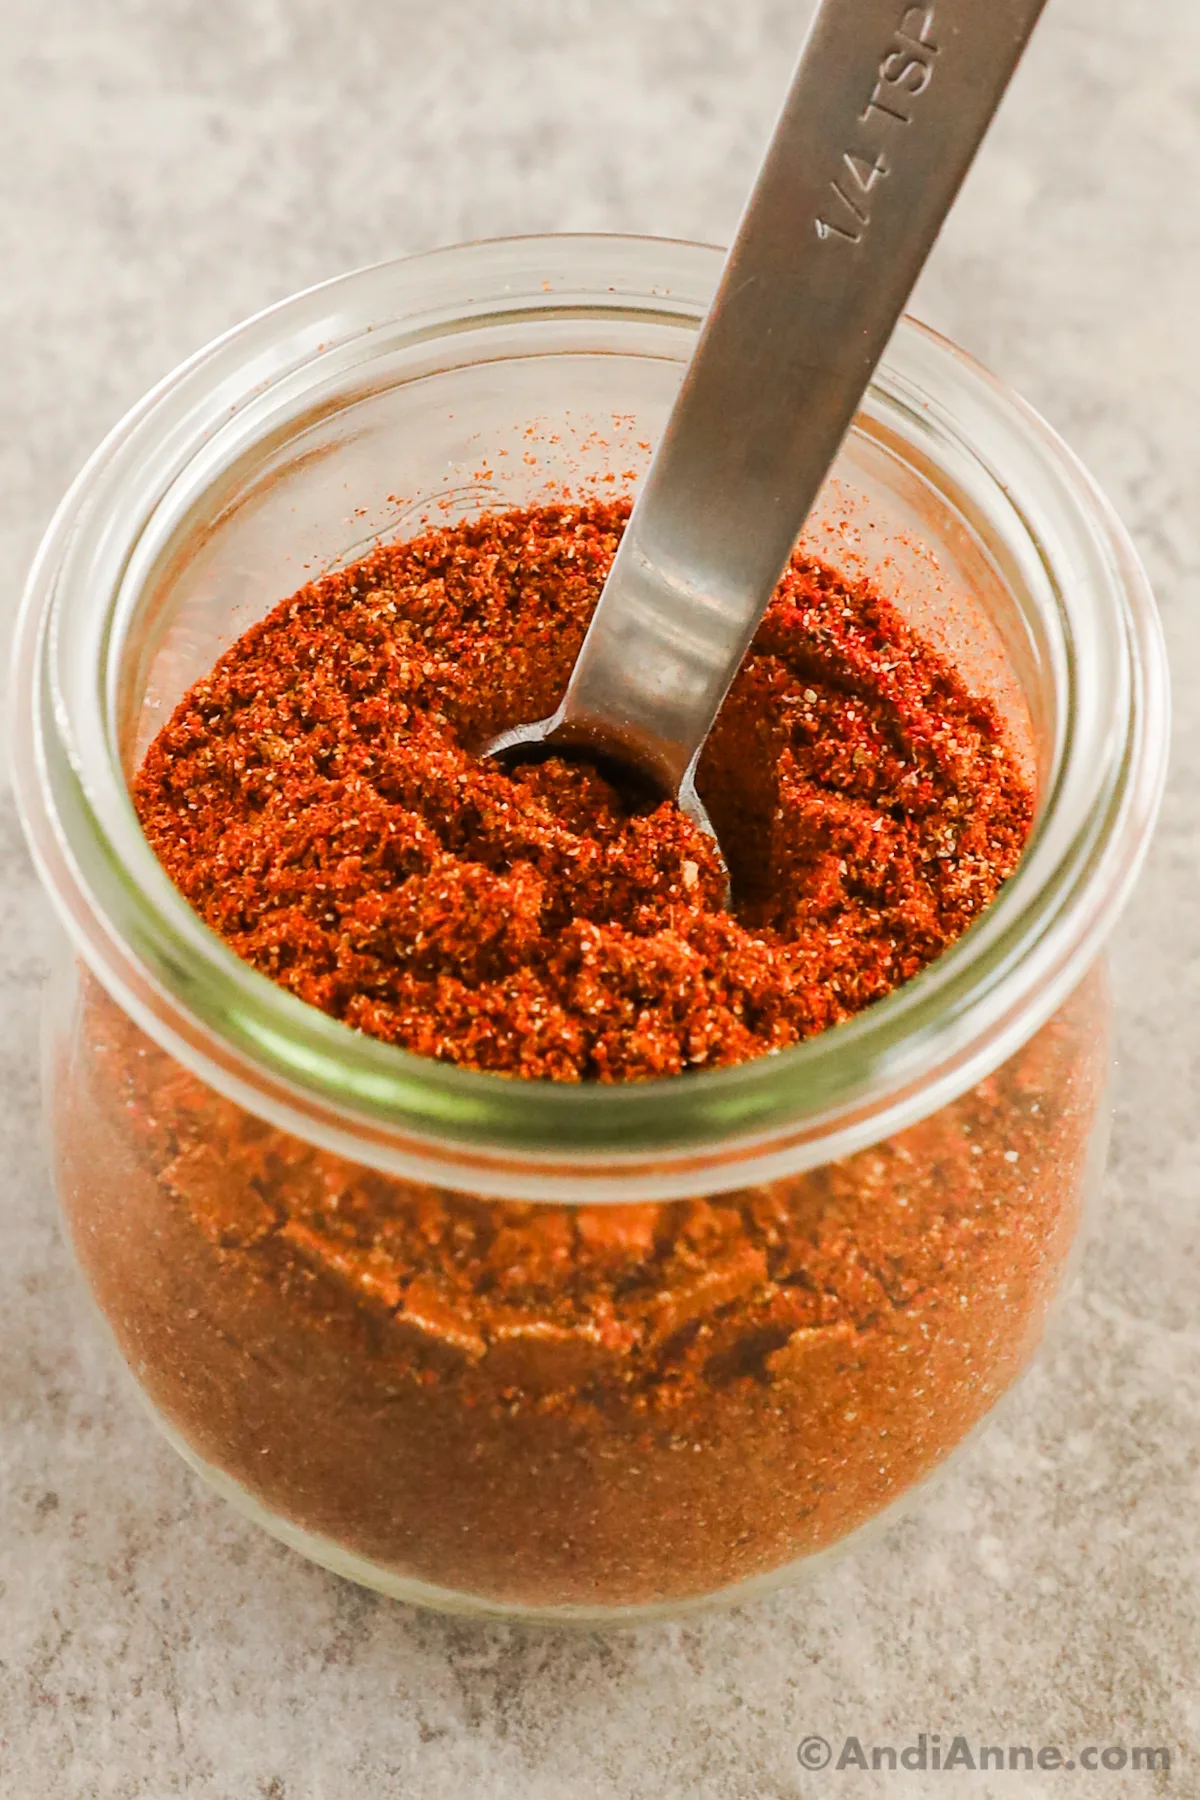 A jar of taco seasoning mix with a spoon inside.